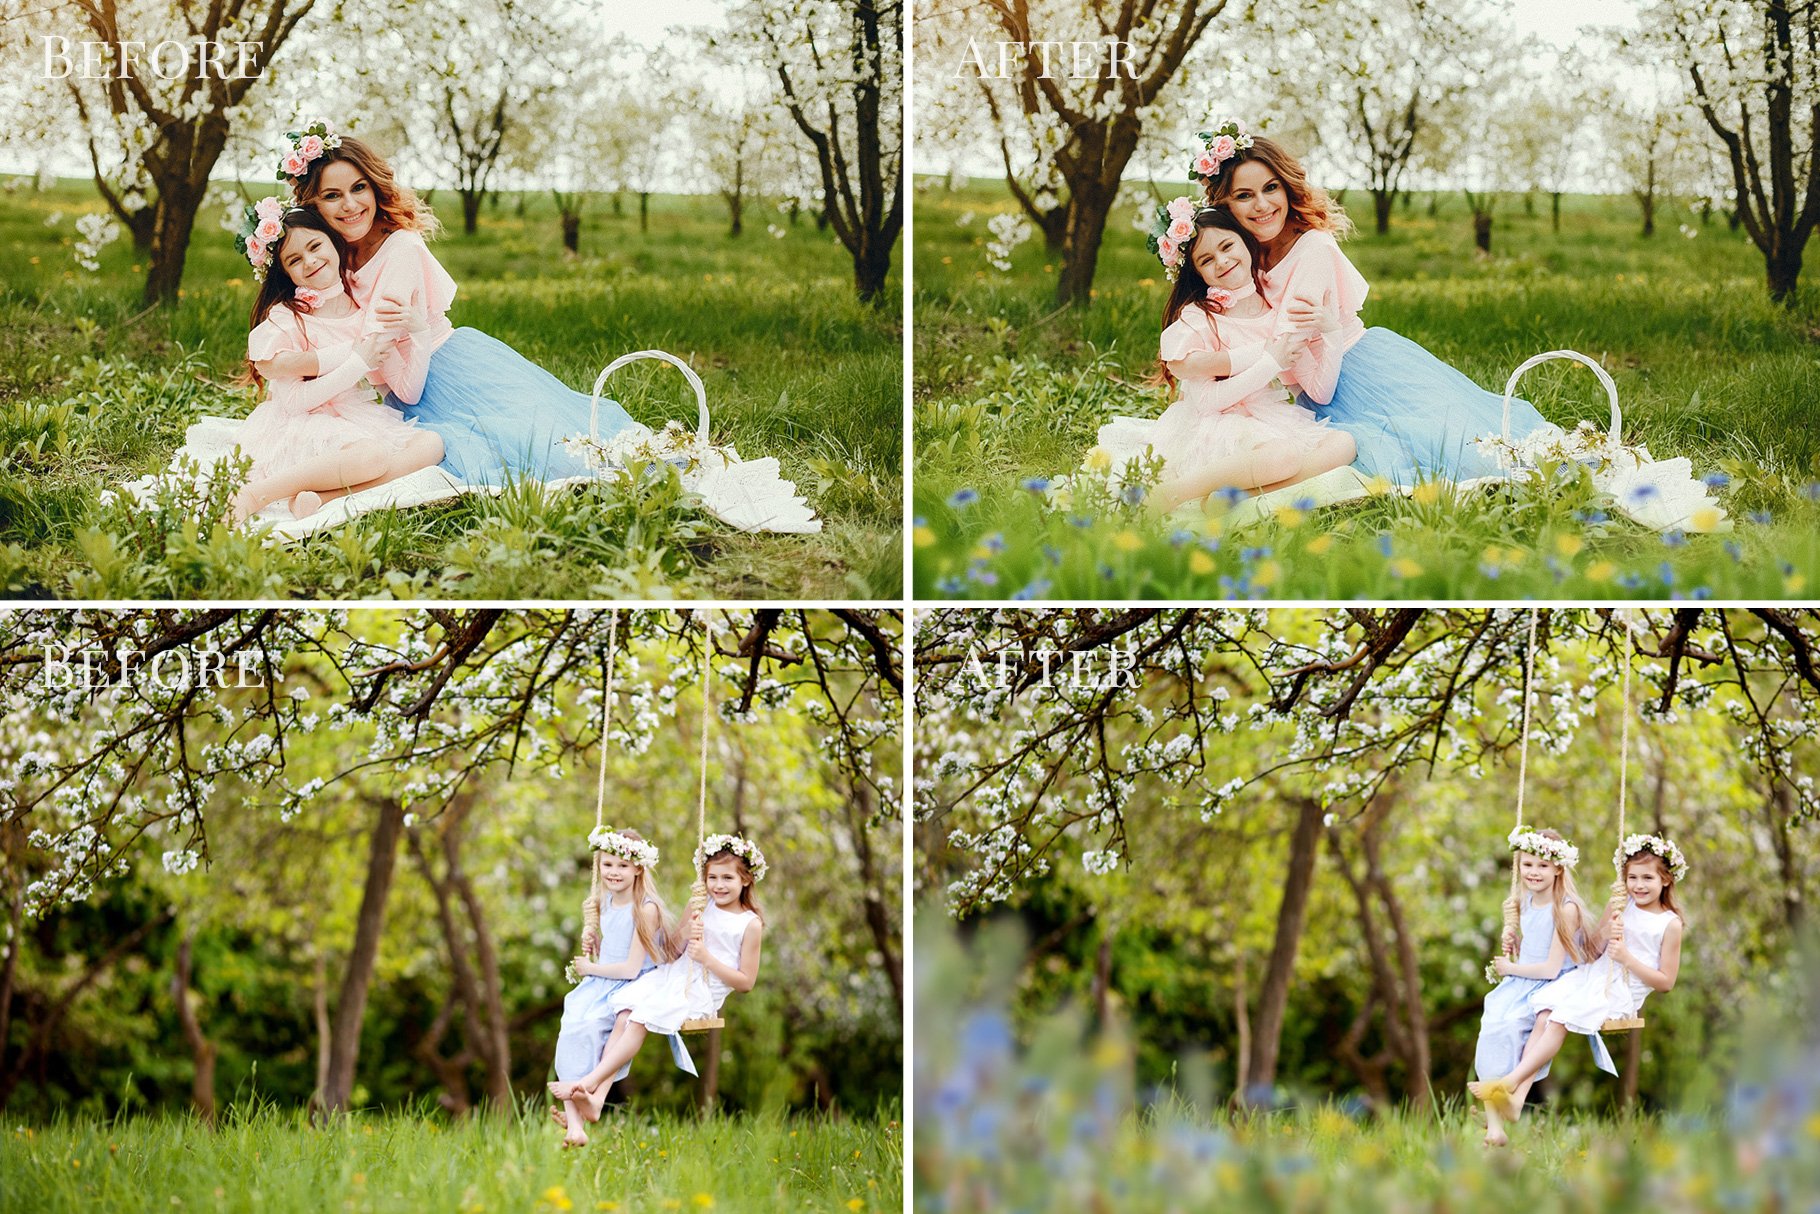 spring meadow photo overlays from brown leopard before after 1 254